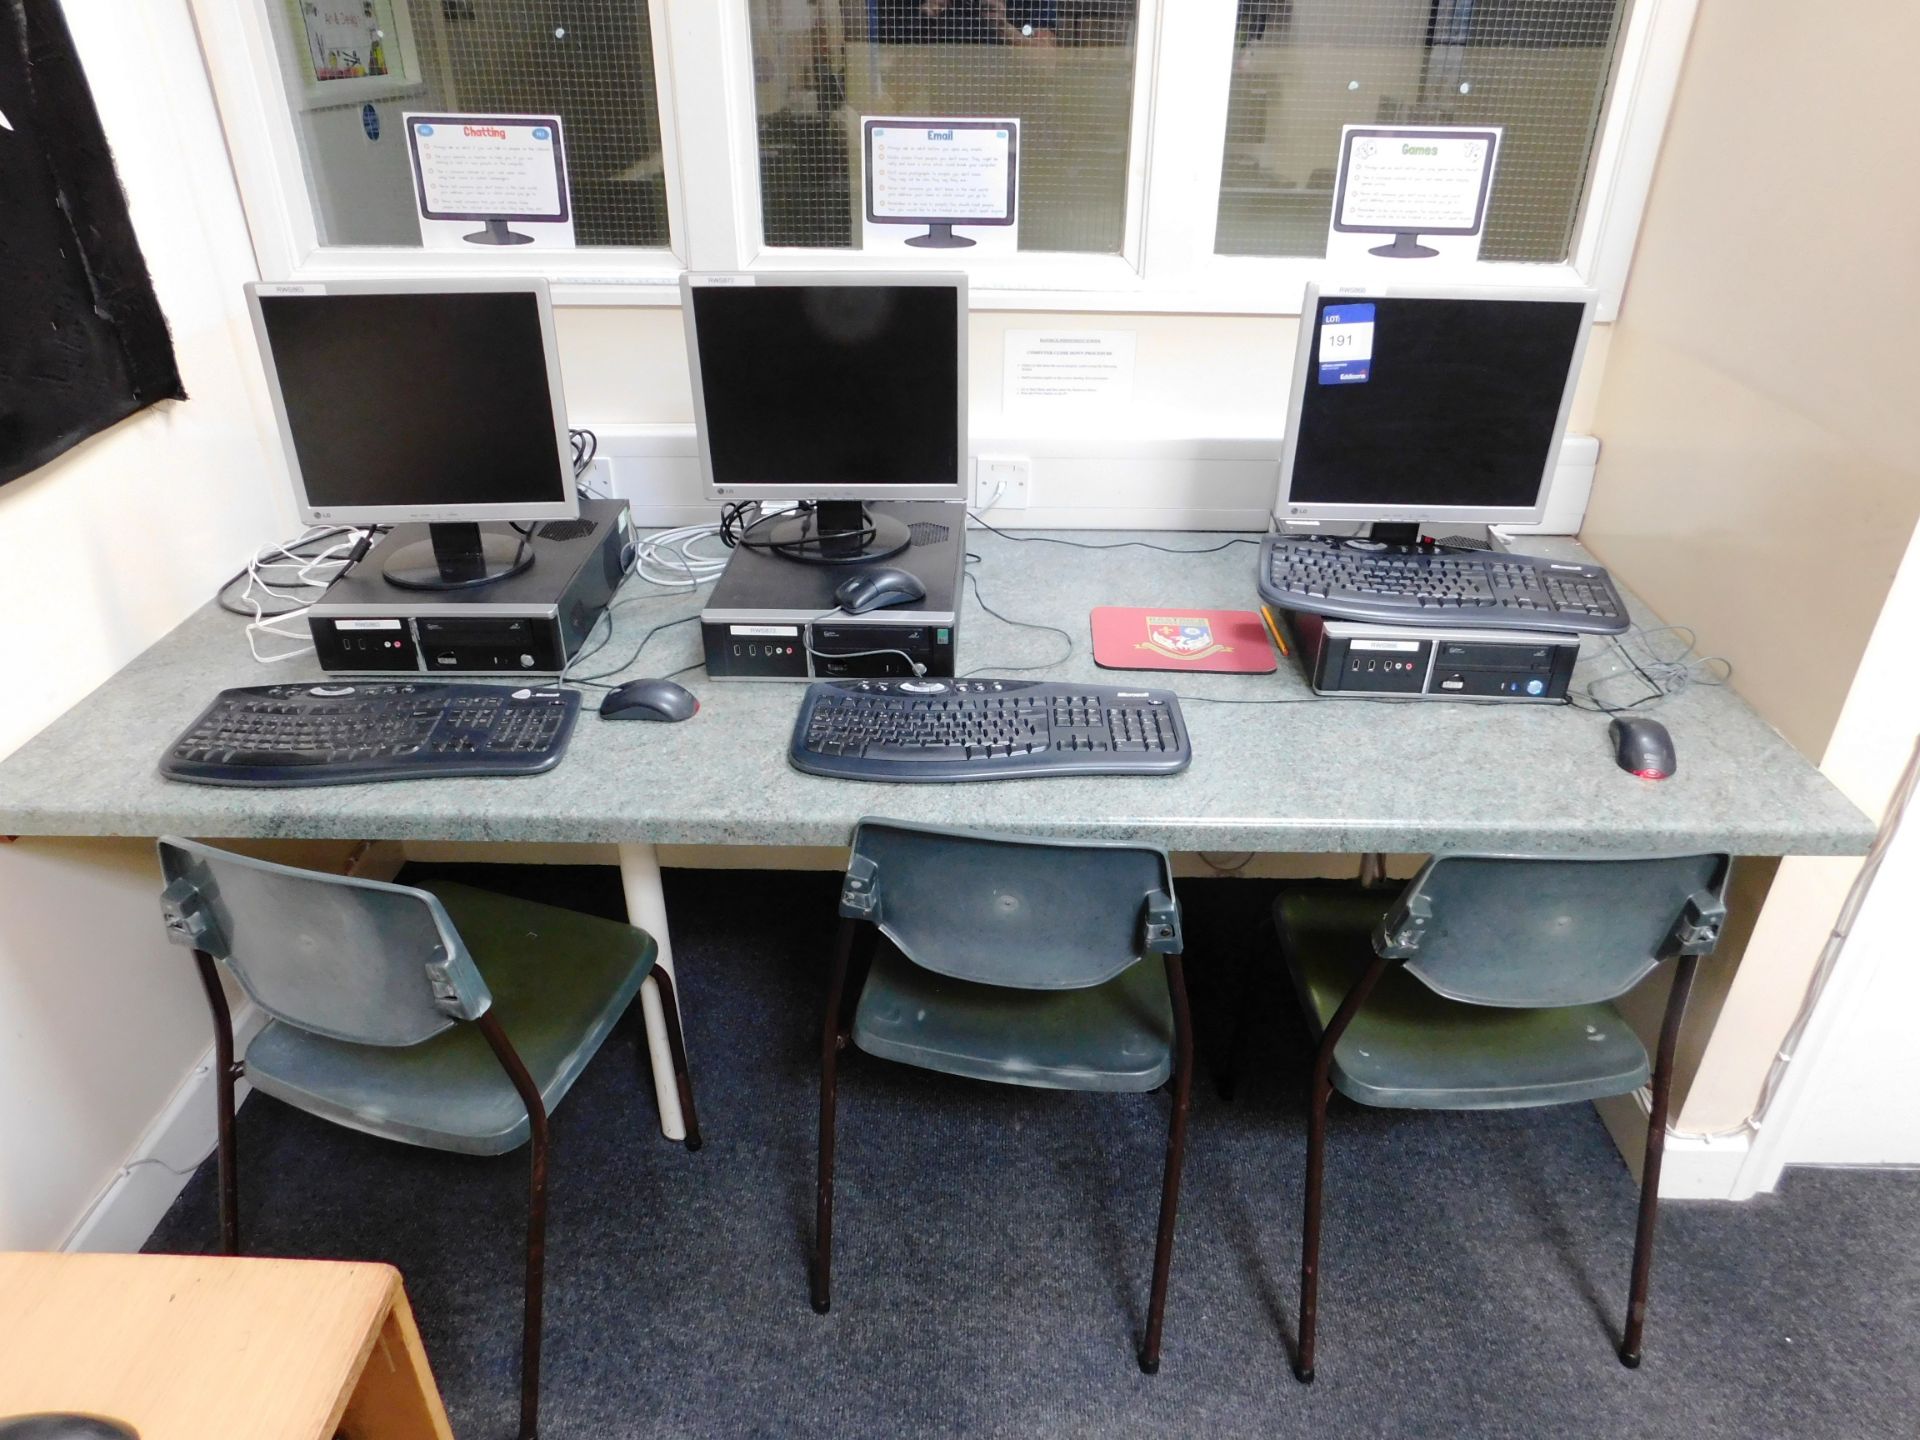 3 x Stone PC 1103 Computers with LG Monitors